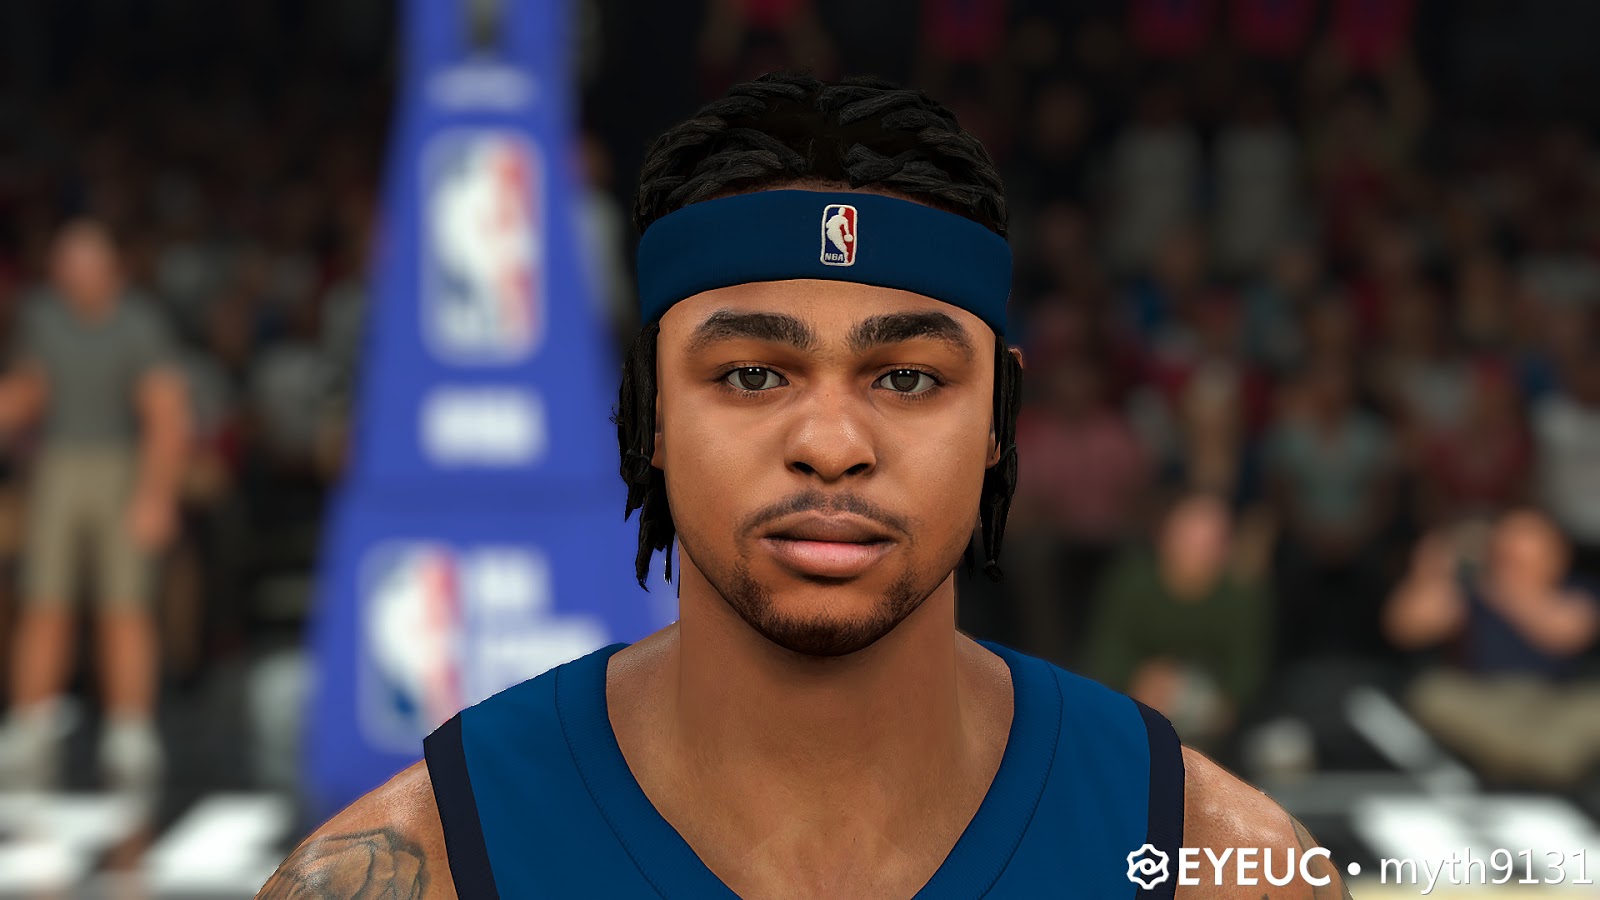 D'Angelo Russell Face, Hair and Body Model By myth25 FOR 2K20.